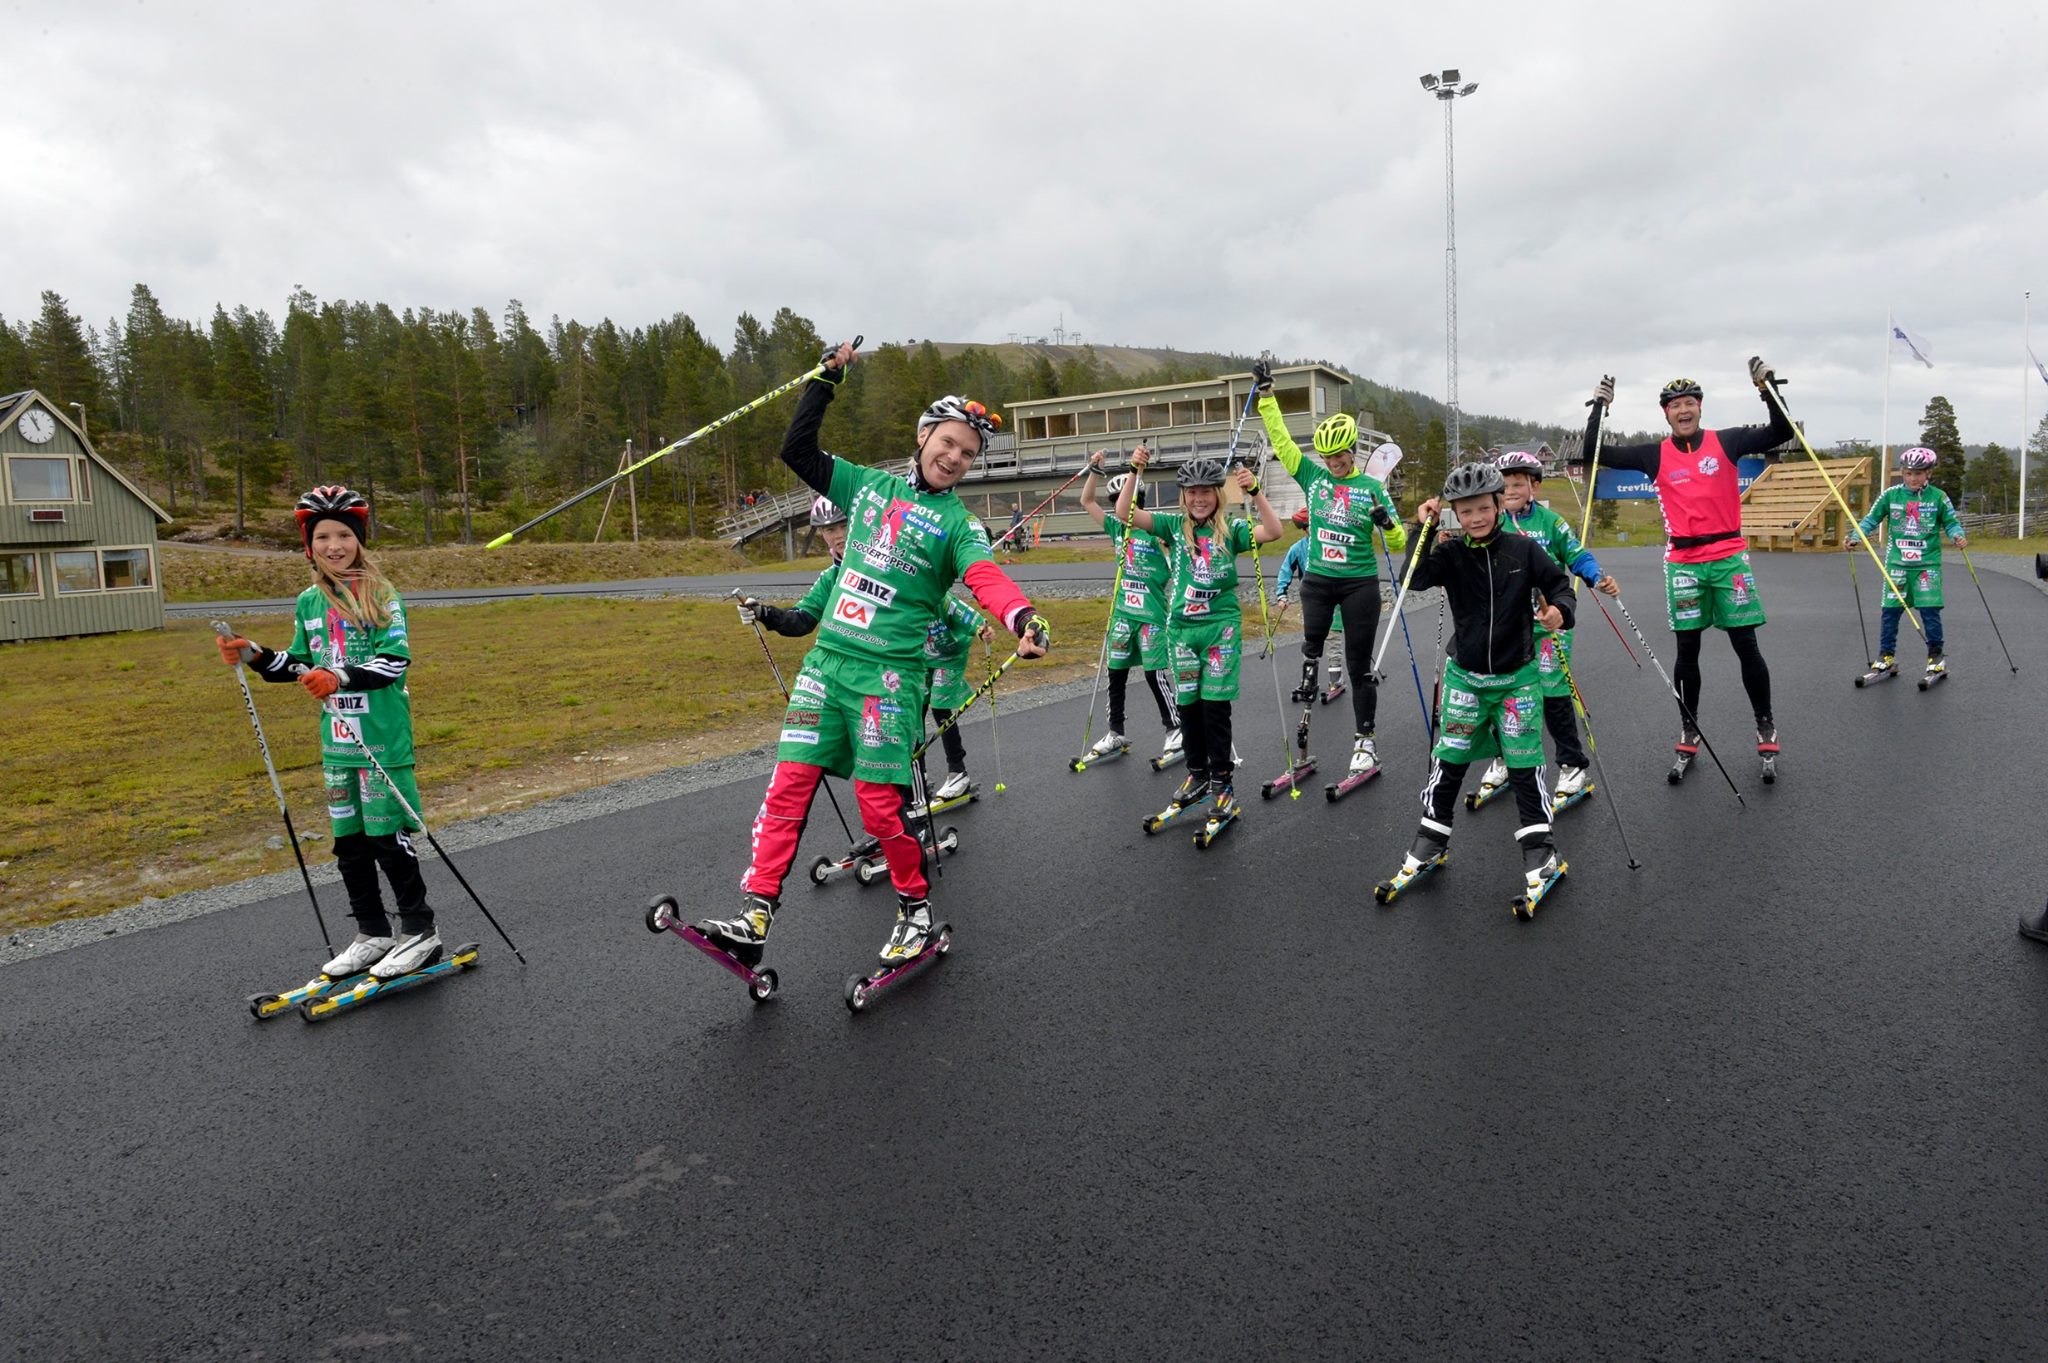 Bryntesson rollerskiing with campers this summer. Photo: Team Robin.